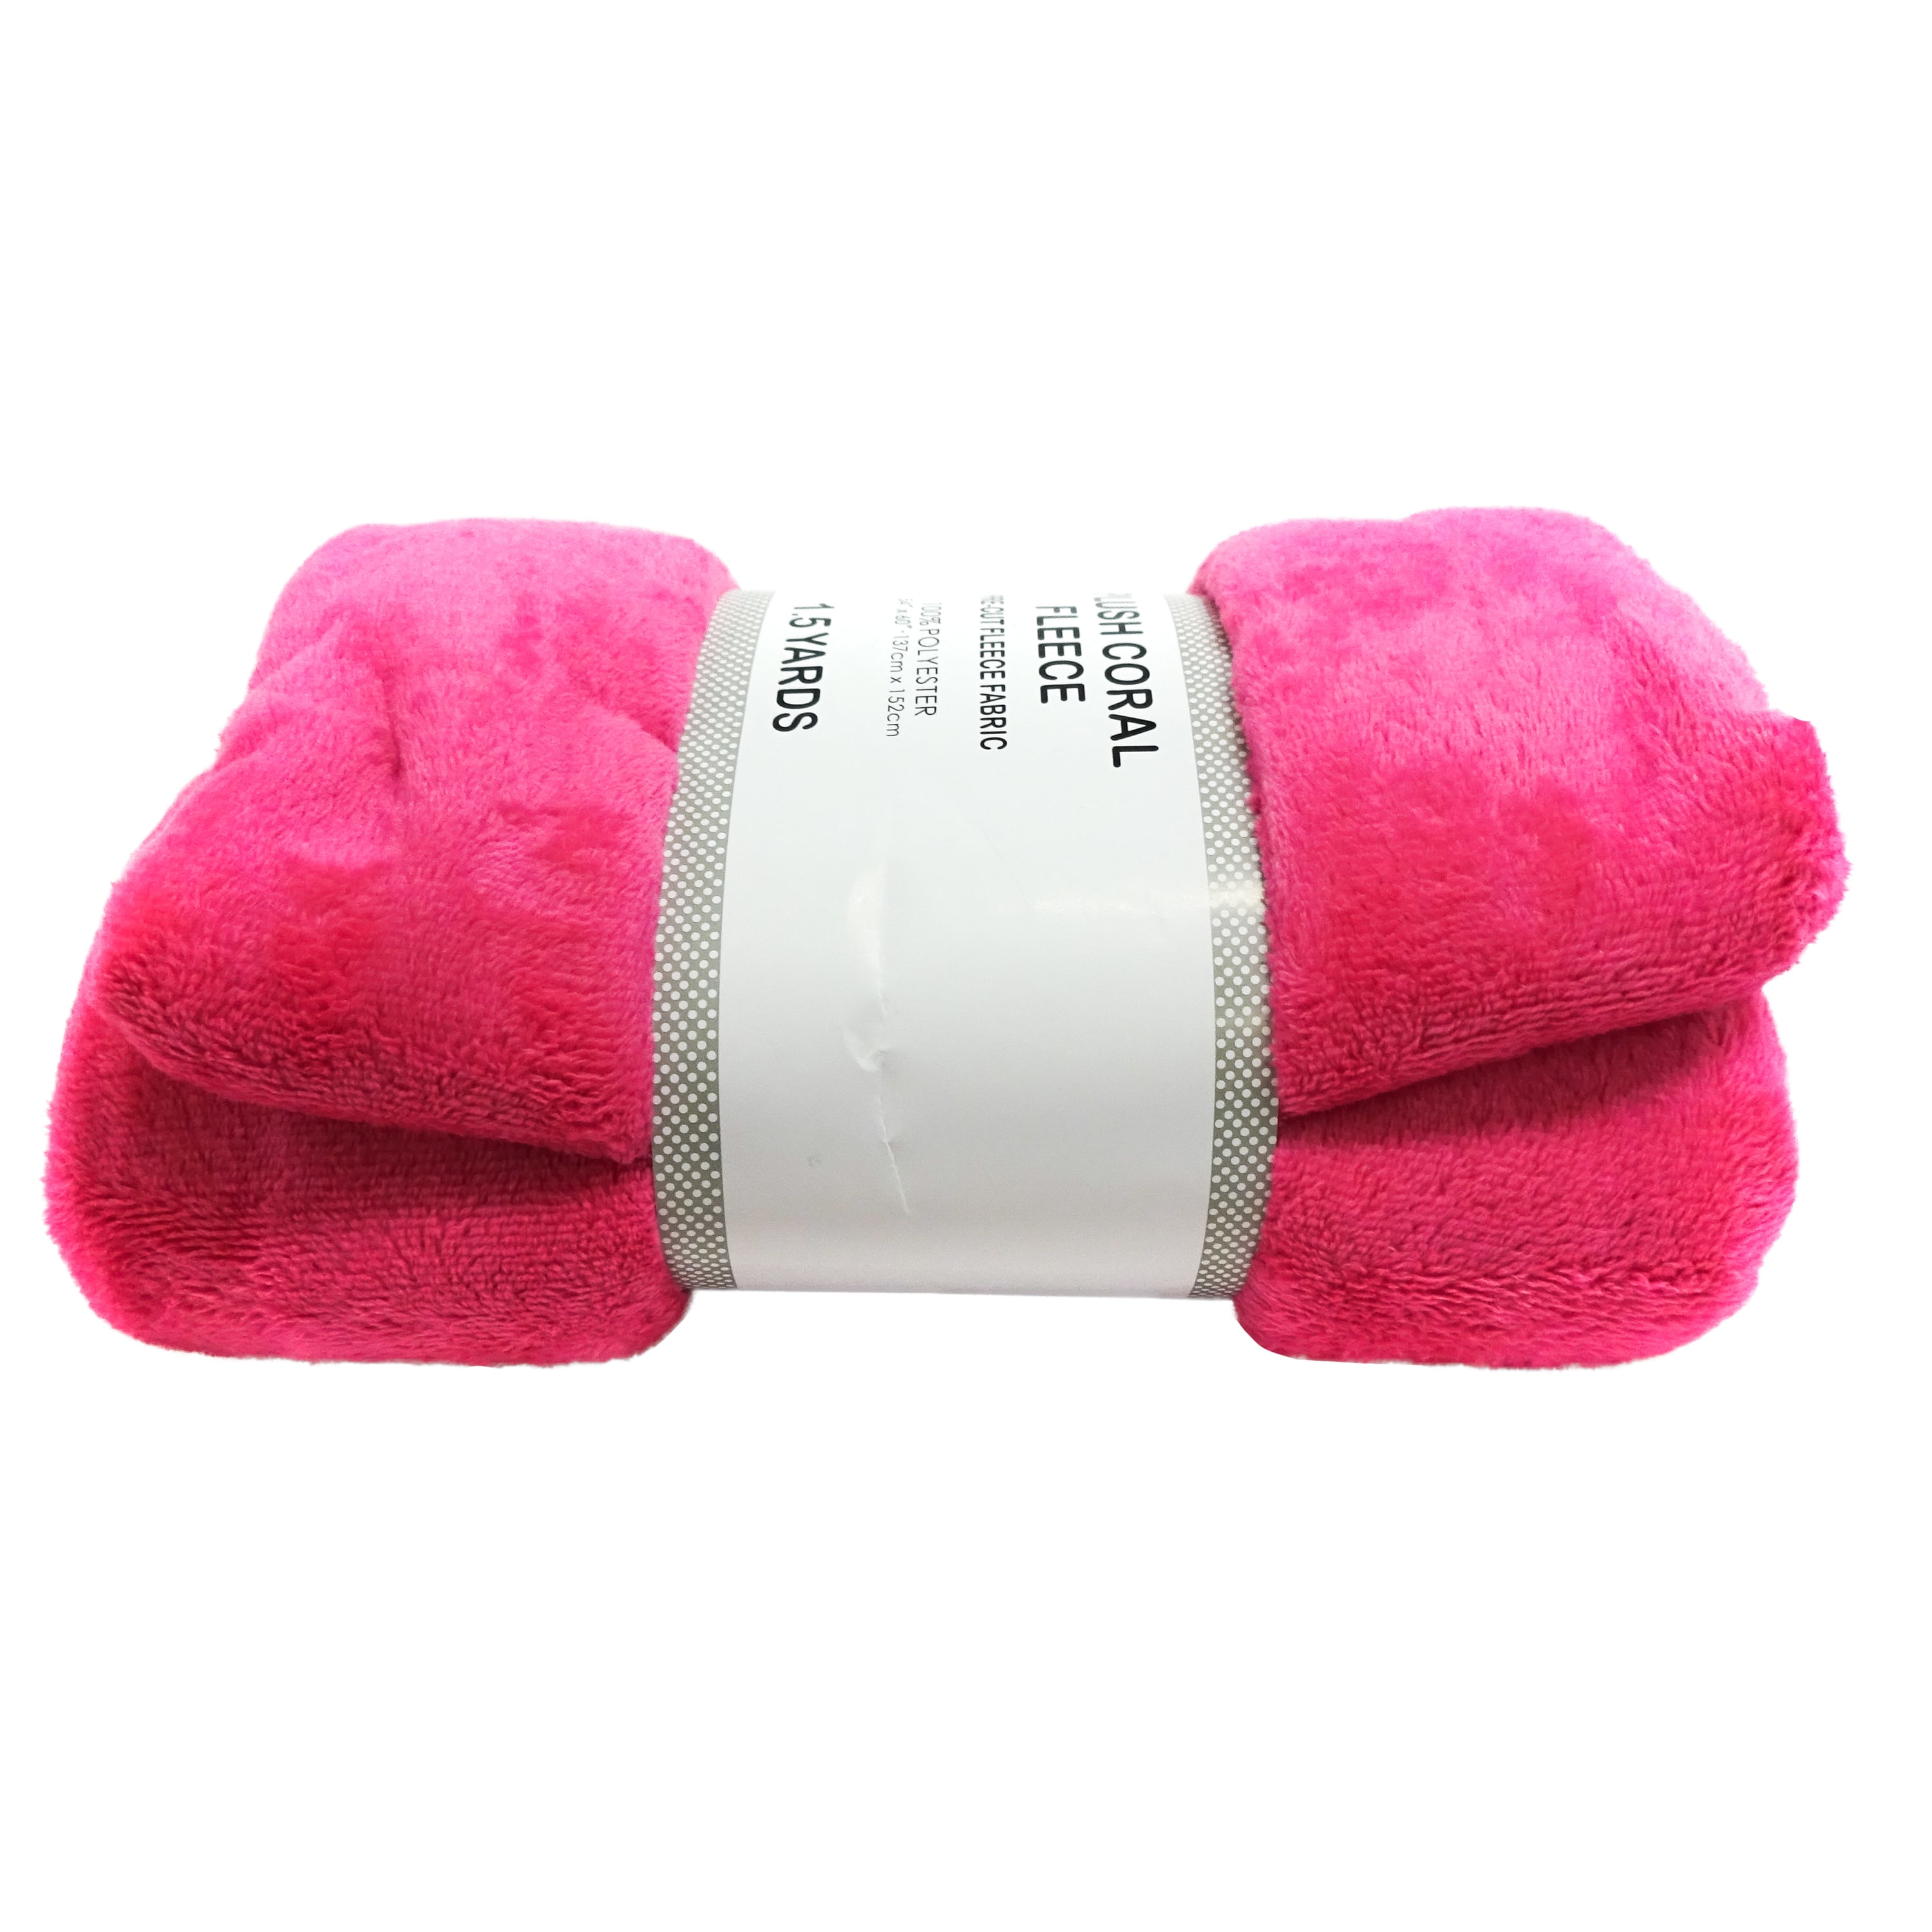 100% Microfiber Coral Fleece Towels with Compound Constructure